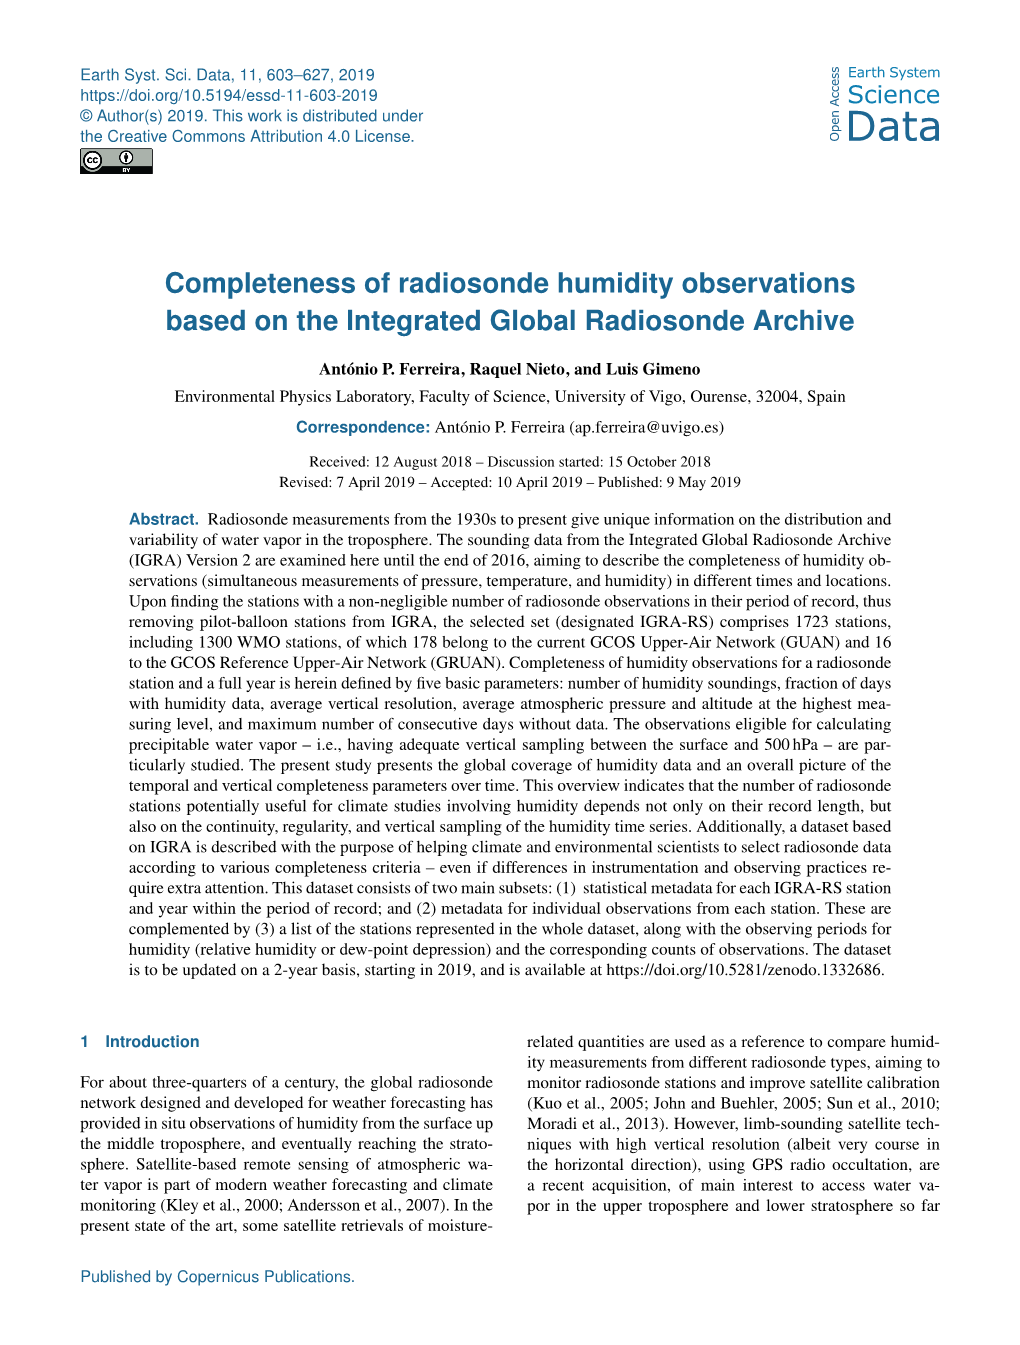 Completeness of Radiosonde Humidity Observations Based on the Integrated Global Radiosonde Archive